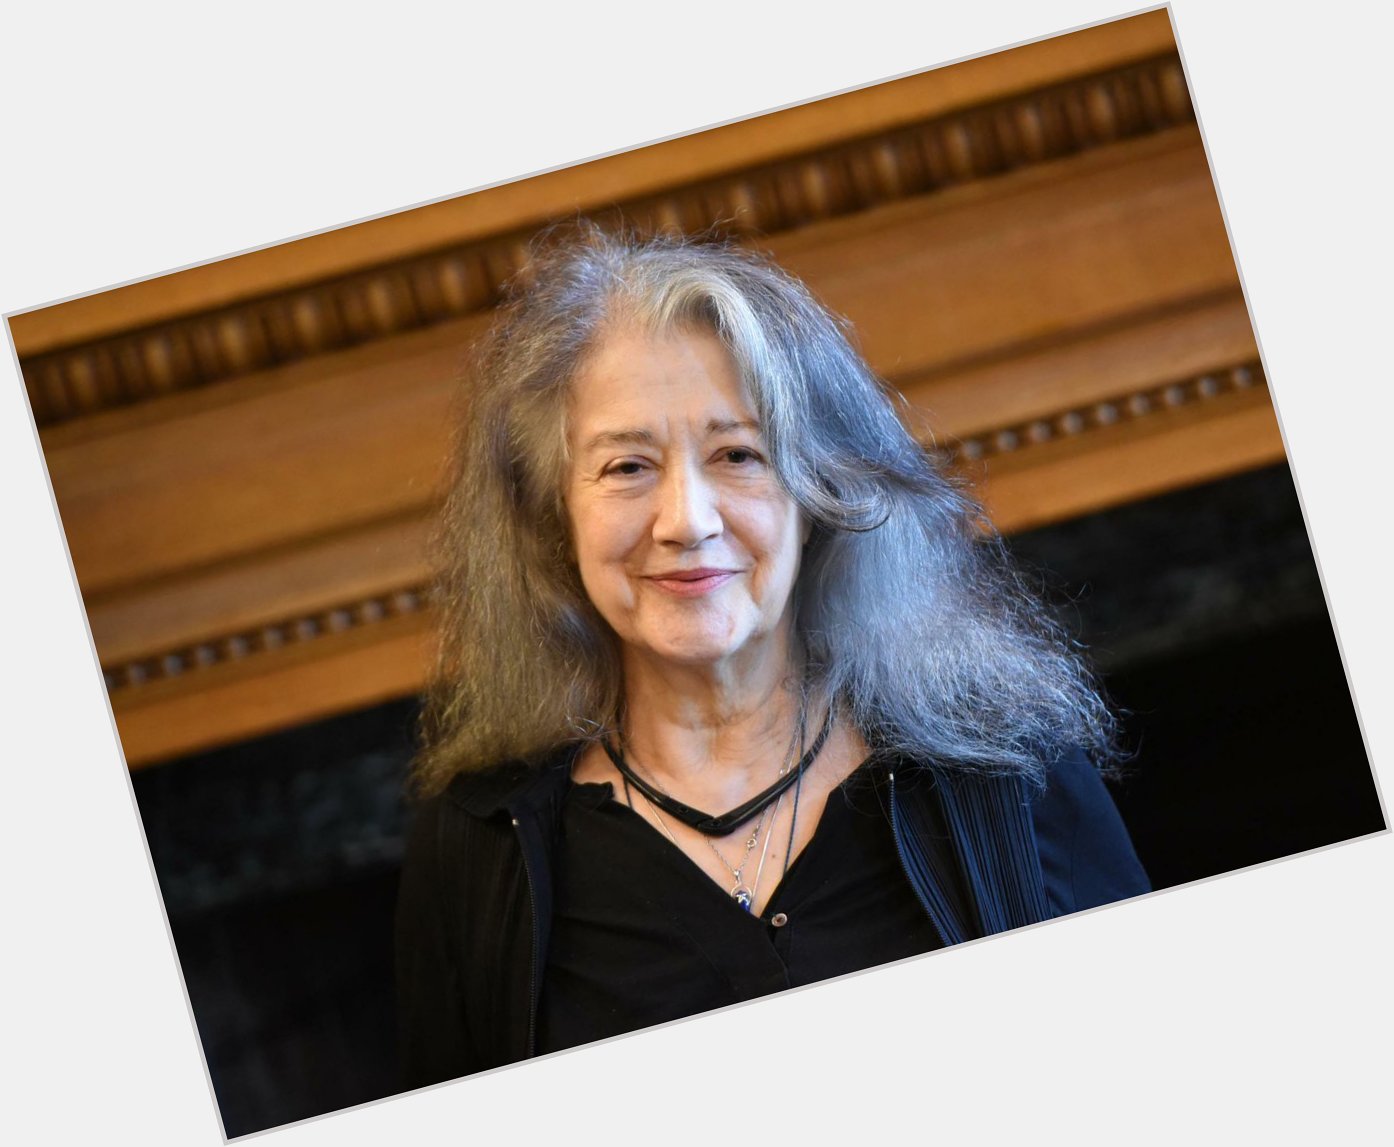  in 1941, Happy 81st Birthday to this living legend, Martha Argerich.      